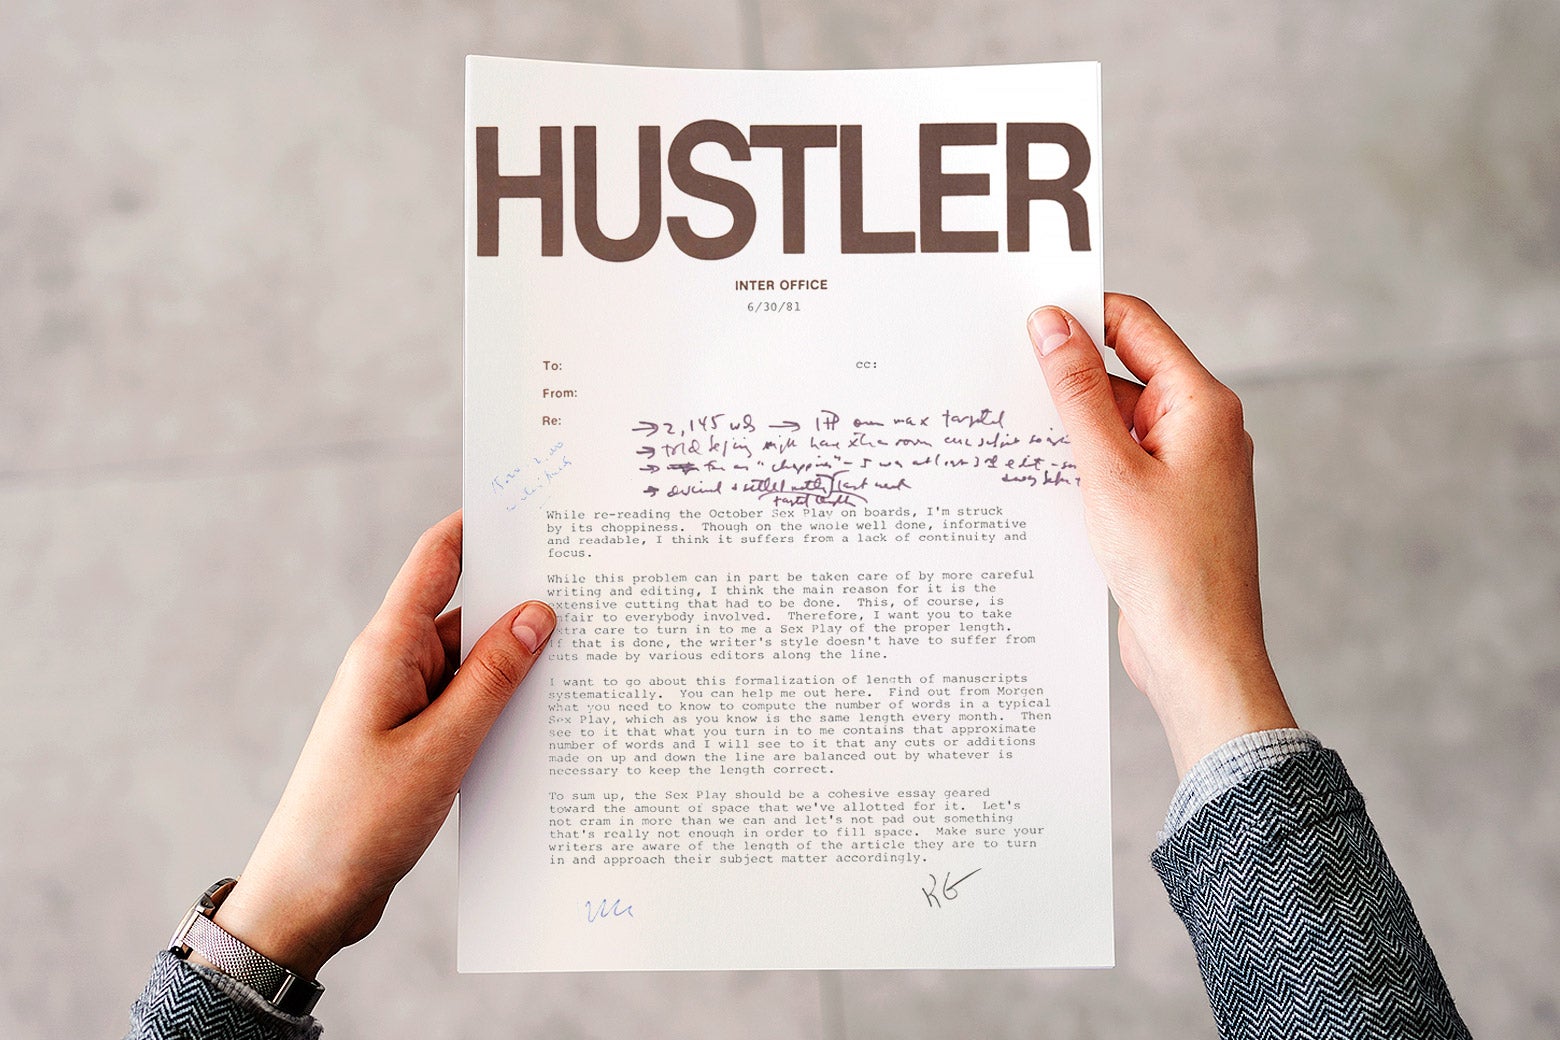 A pair of hands is seen clutching an inter-office memo from Hustler Magazine in the 1980s. The point of view is the man's, looking down at the paper in his hands.